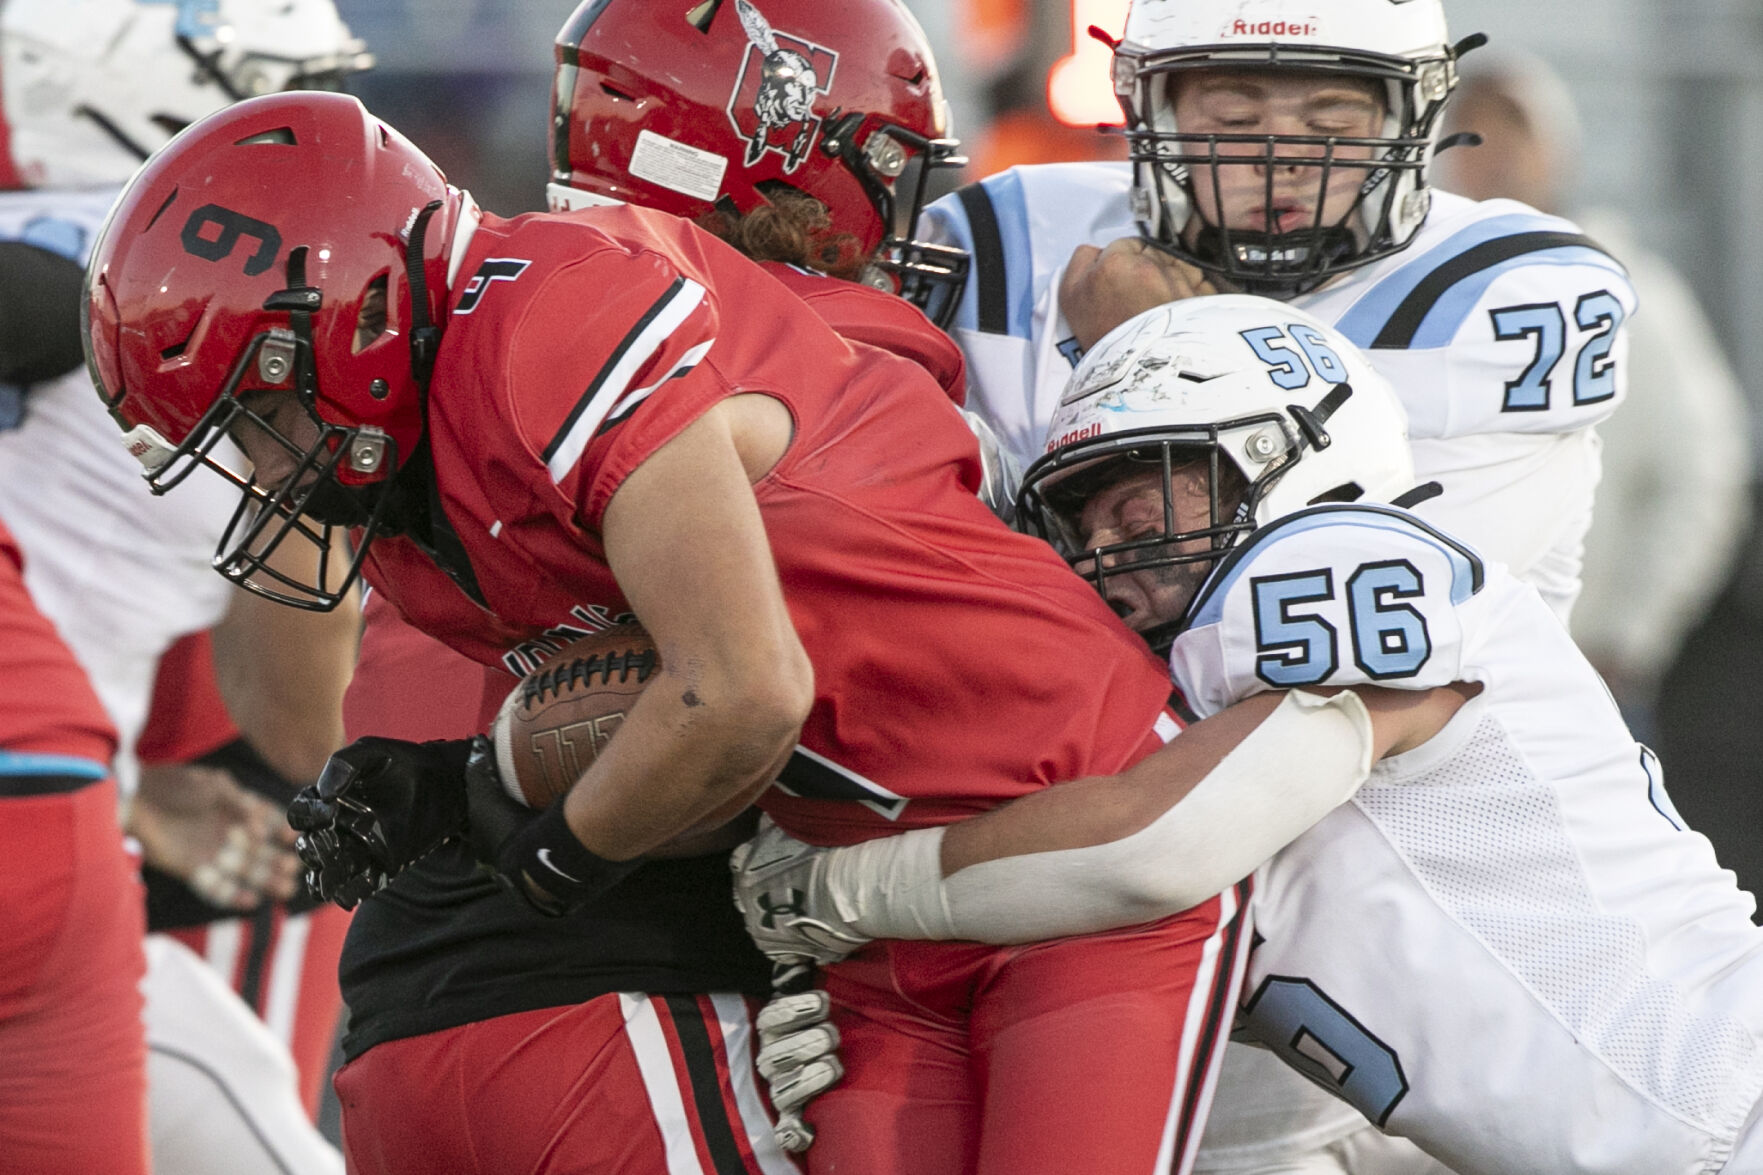 Cheyenne East dominates with strong offense in win over Cheyenne Central